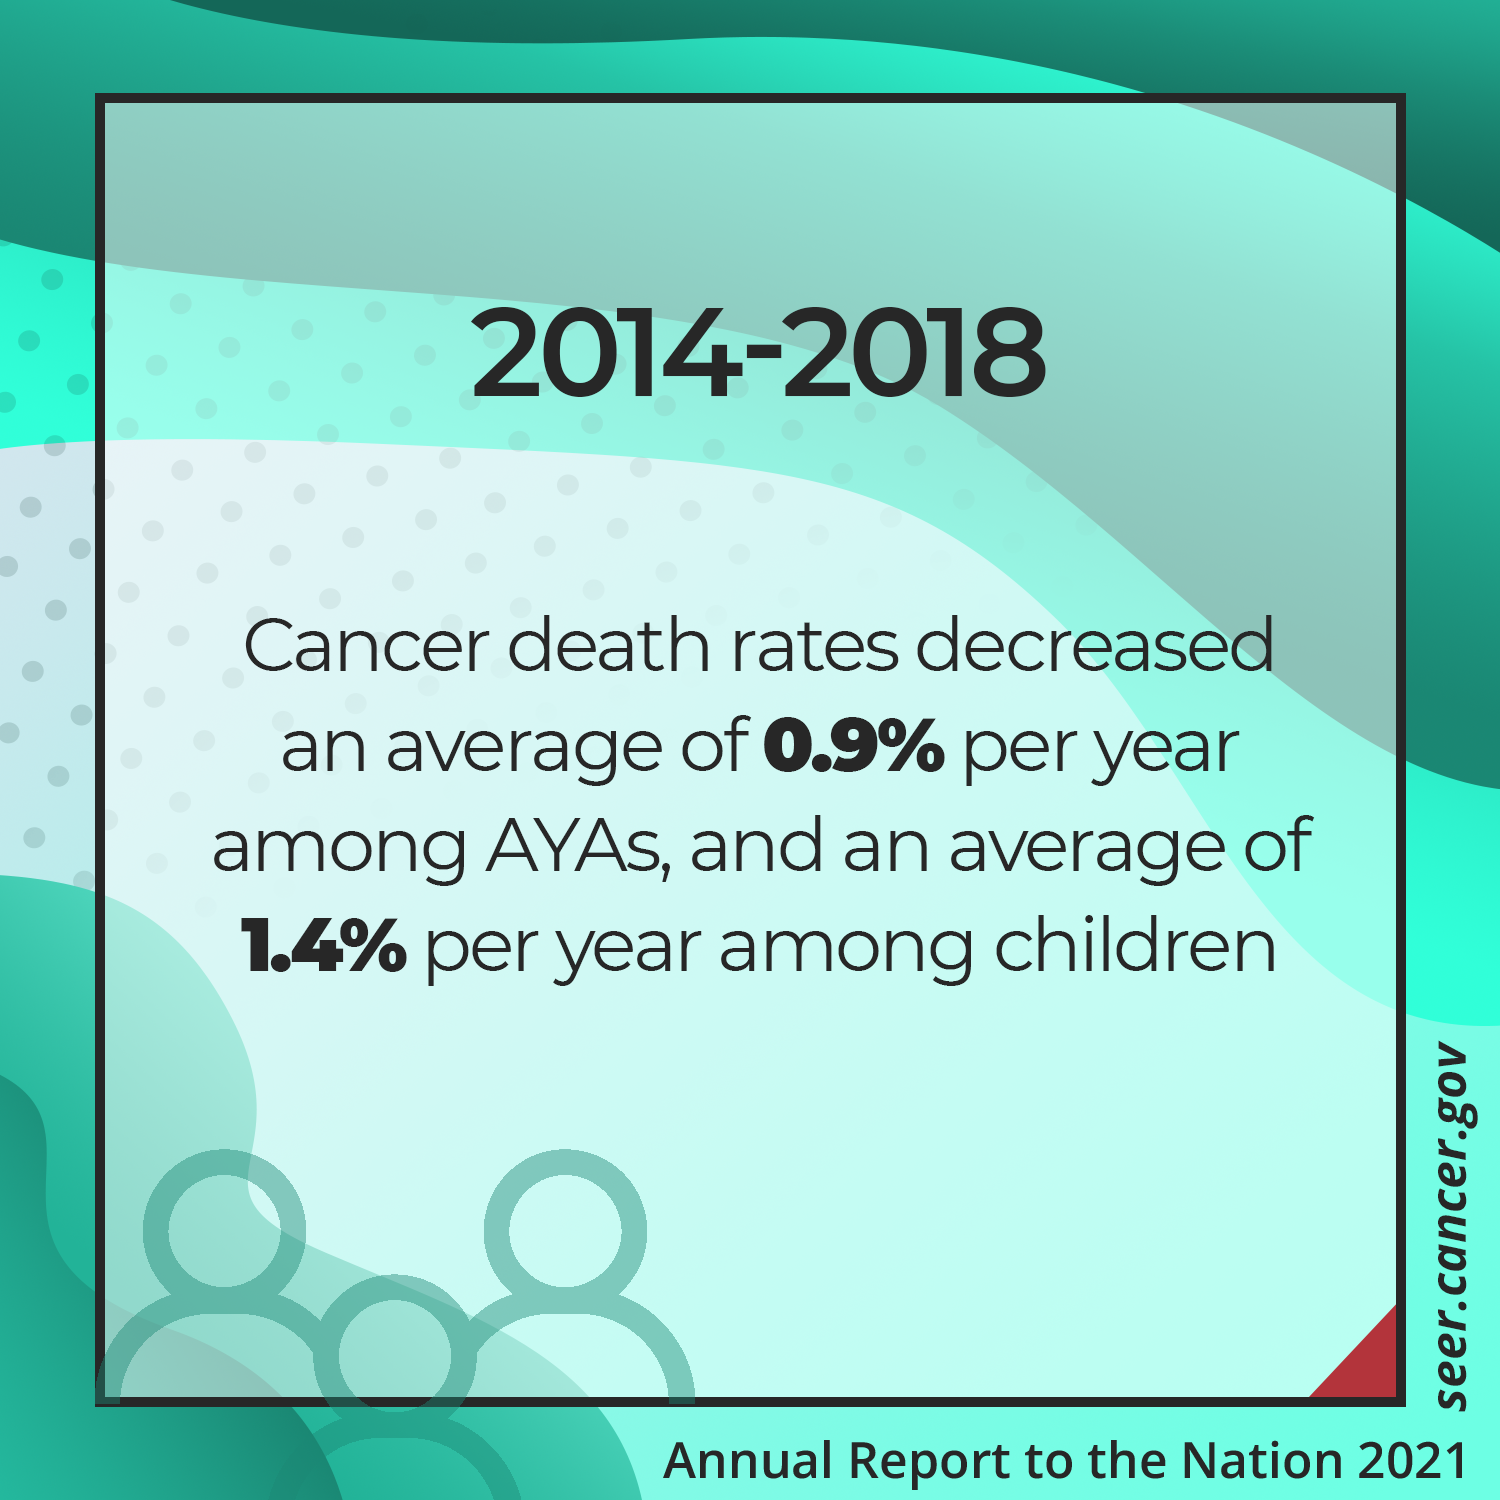 Cancer death rates decreased an average of 0.9% per year among AYAs, and an average of 1.4% per year among children between 2014 and 2018